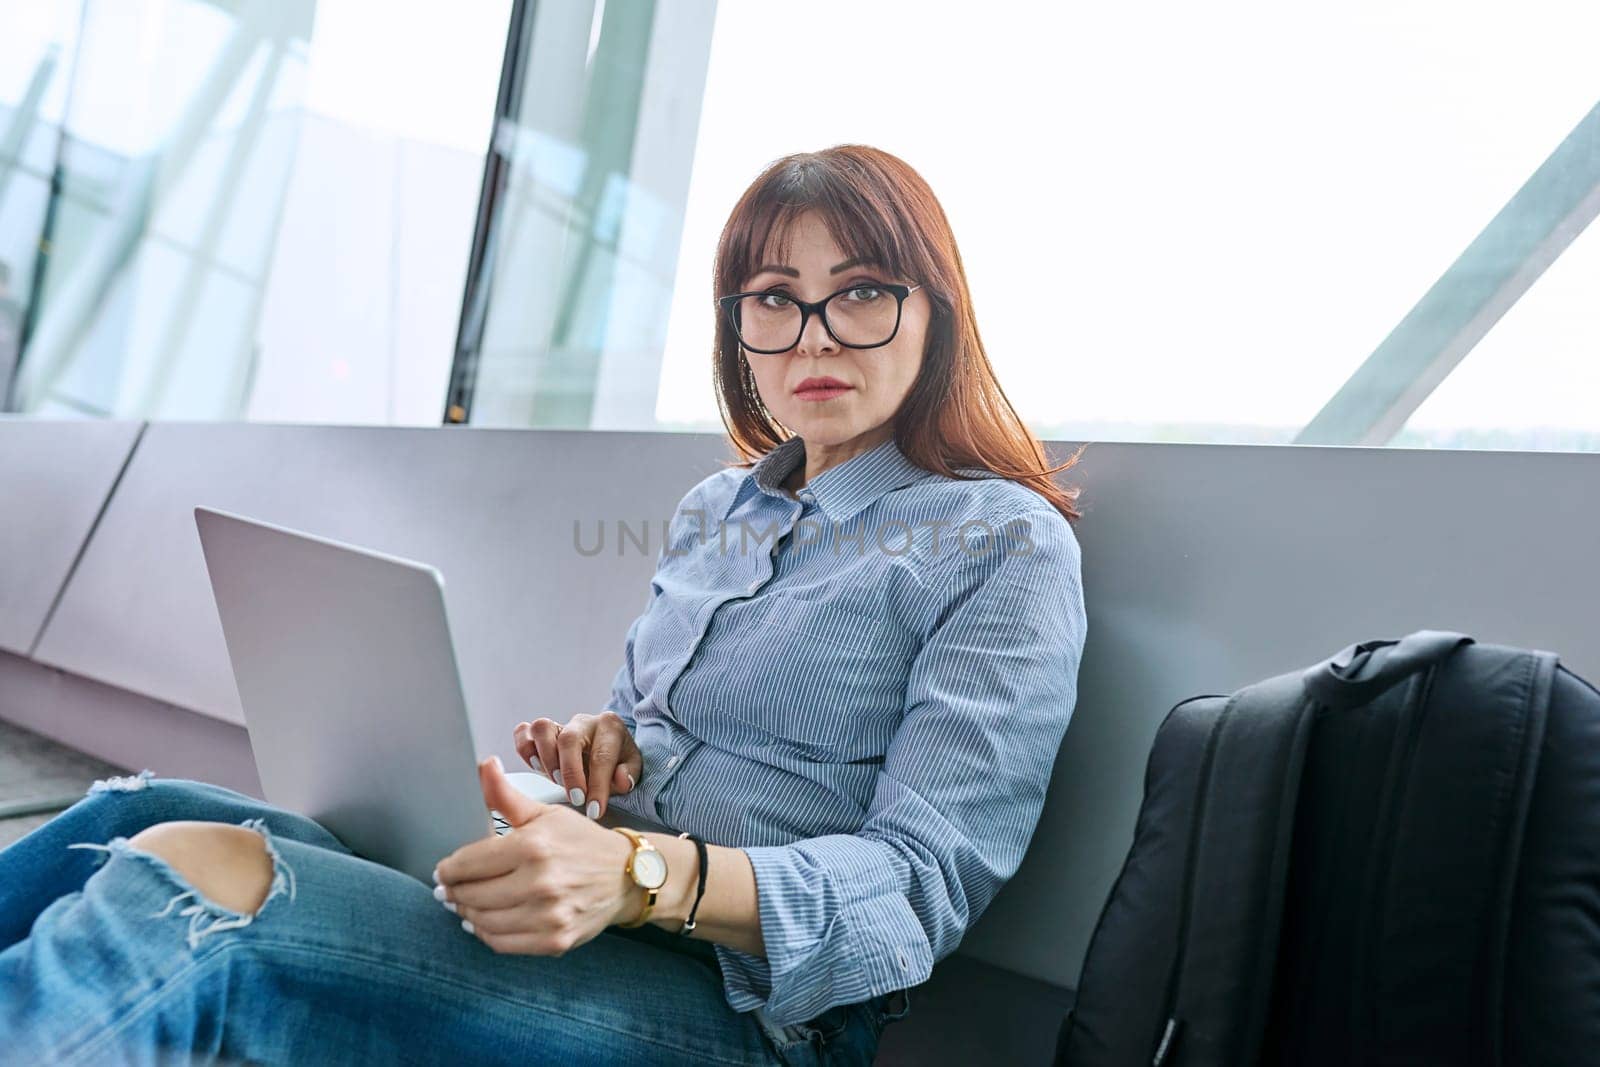 Middle aged woman with backpack waiting for airplane flight in airport terminal, using laptop, looking at camera. Travel, business trip, passenger air transport concept